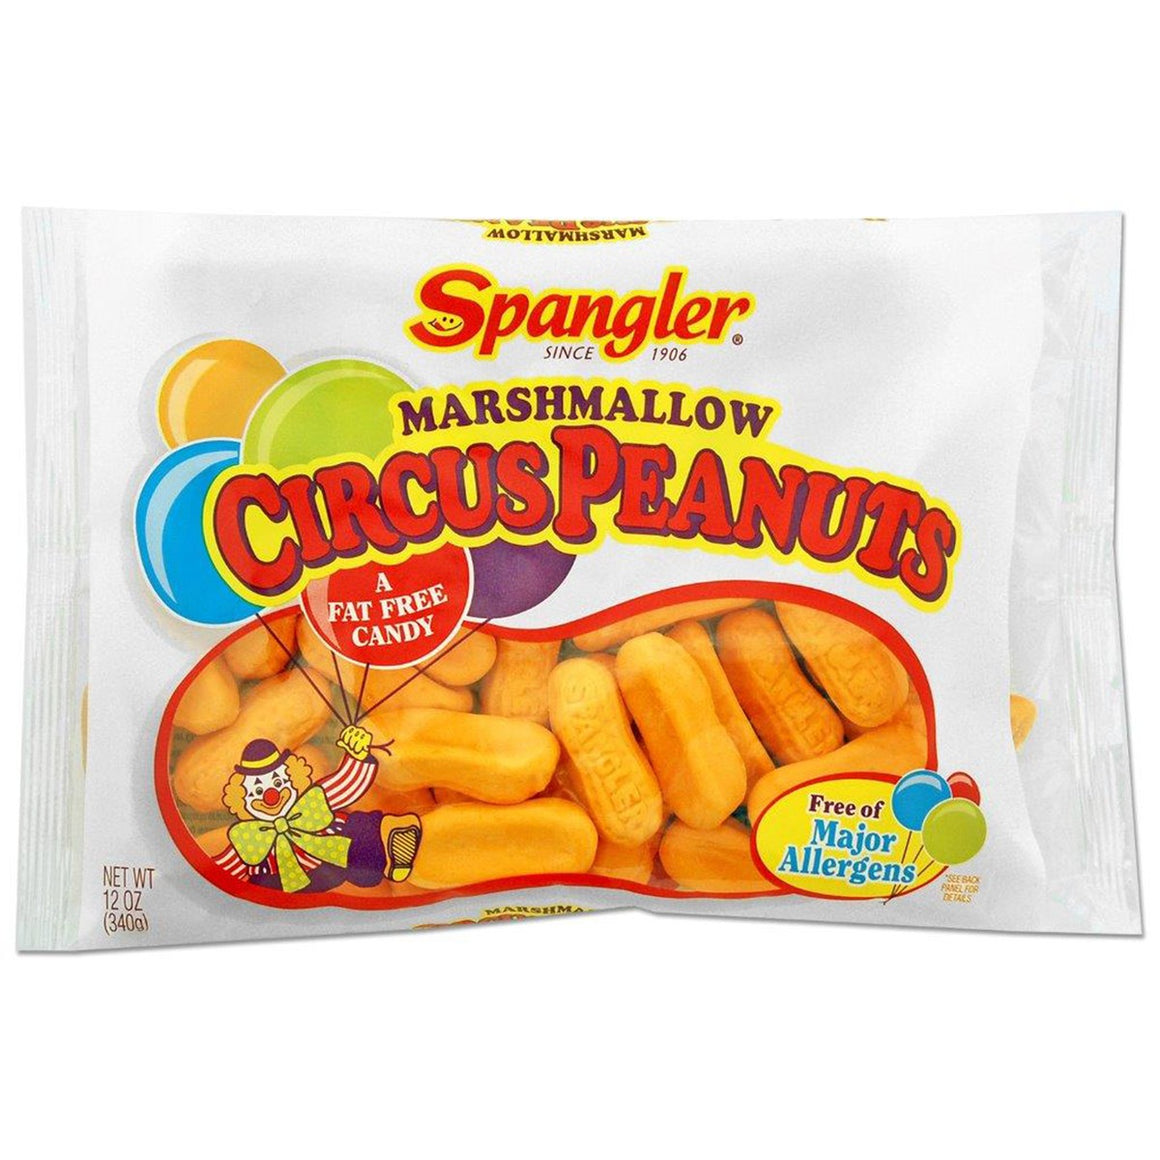 All City Candy Marshmallow Circus Peanuts Candy - 12-oz. Bag Marshmallow Spangler For fresh candy and great service, visit www.allcitycandy.com